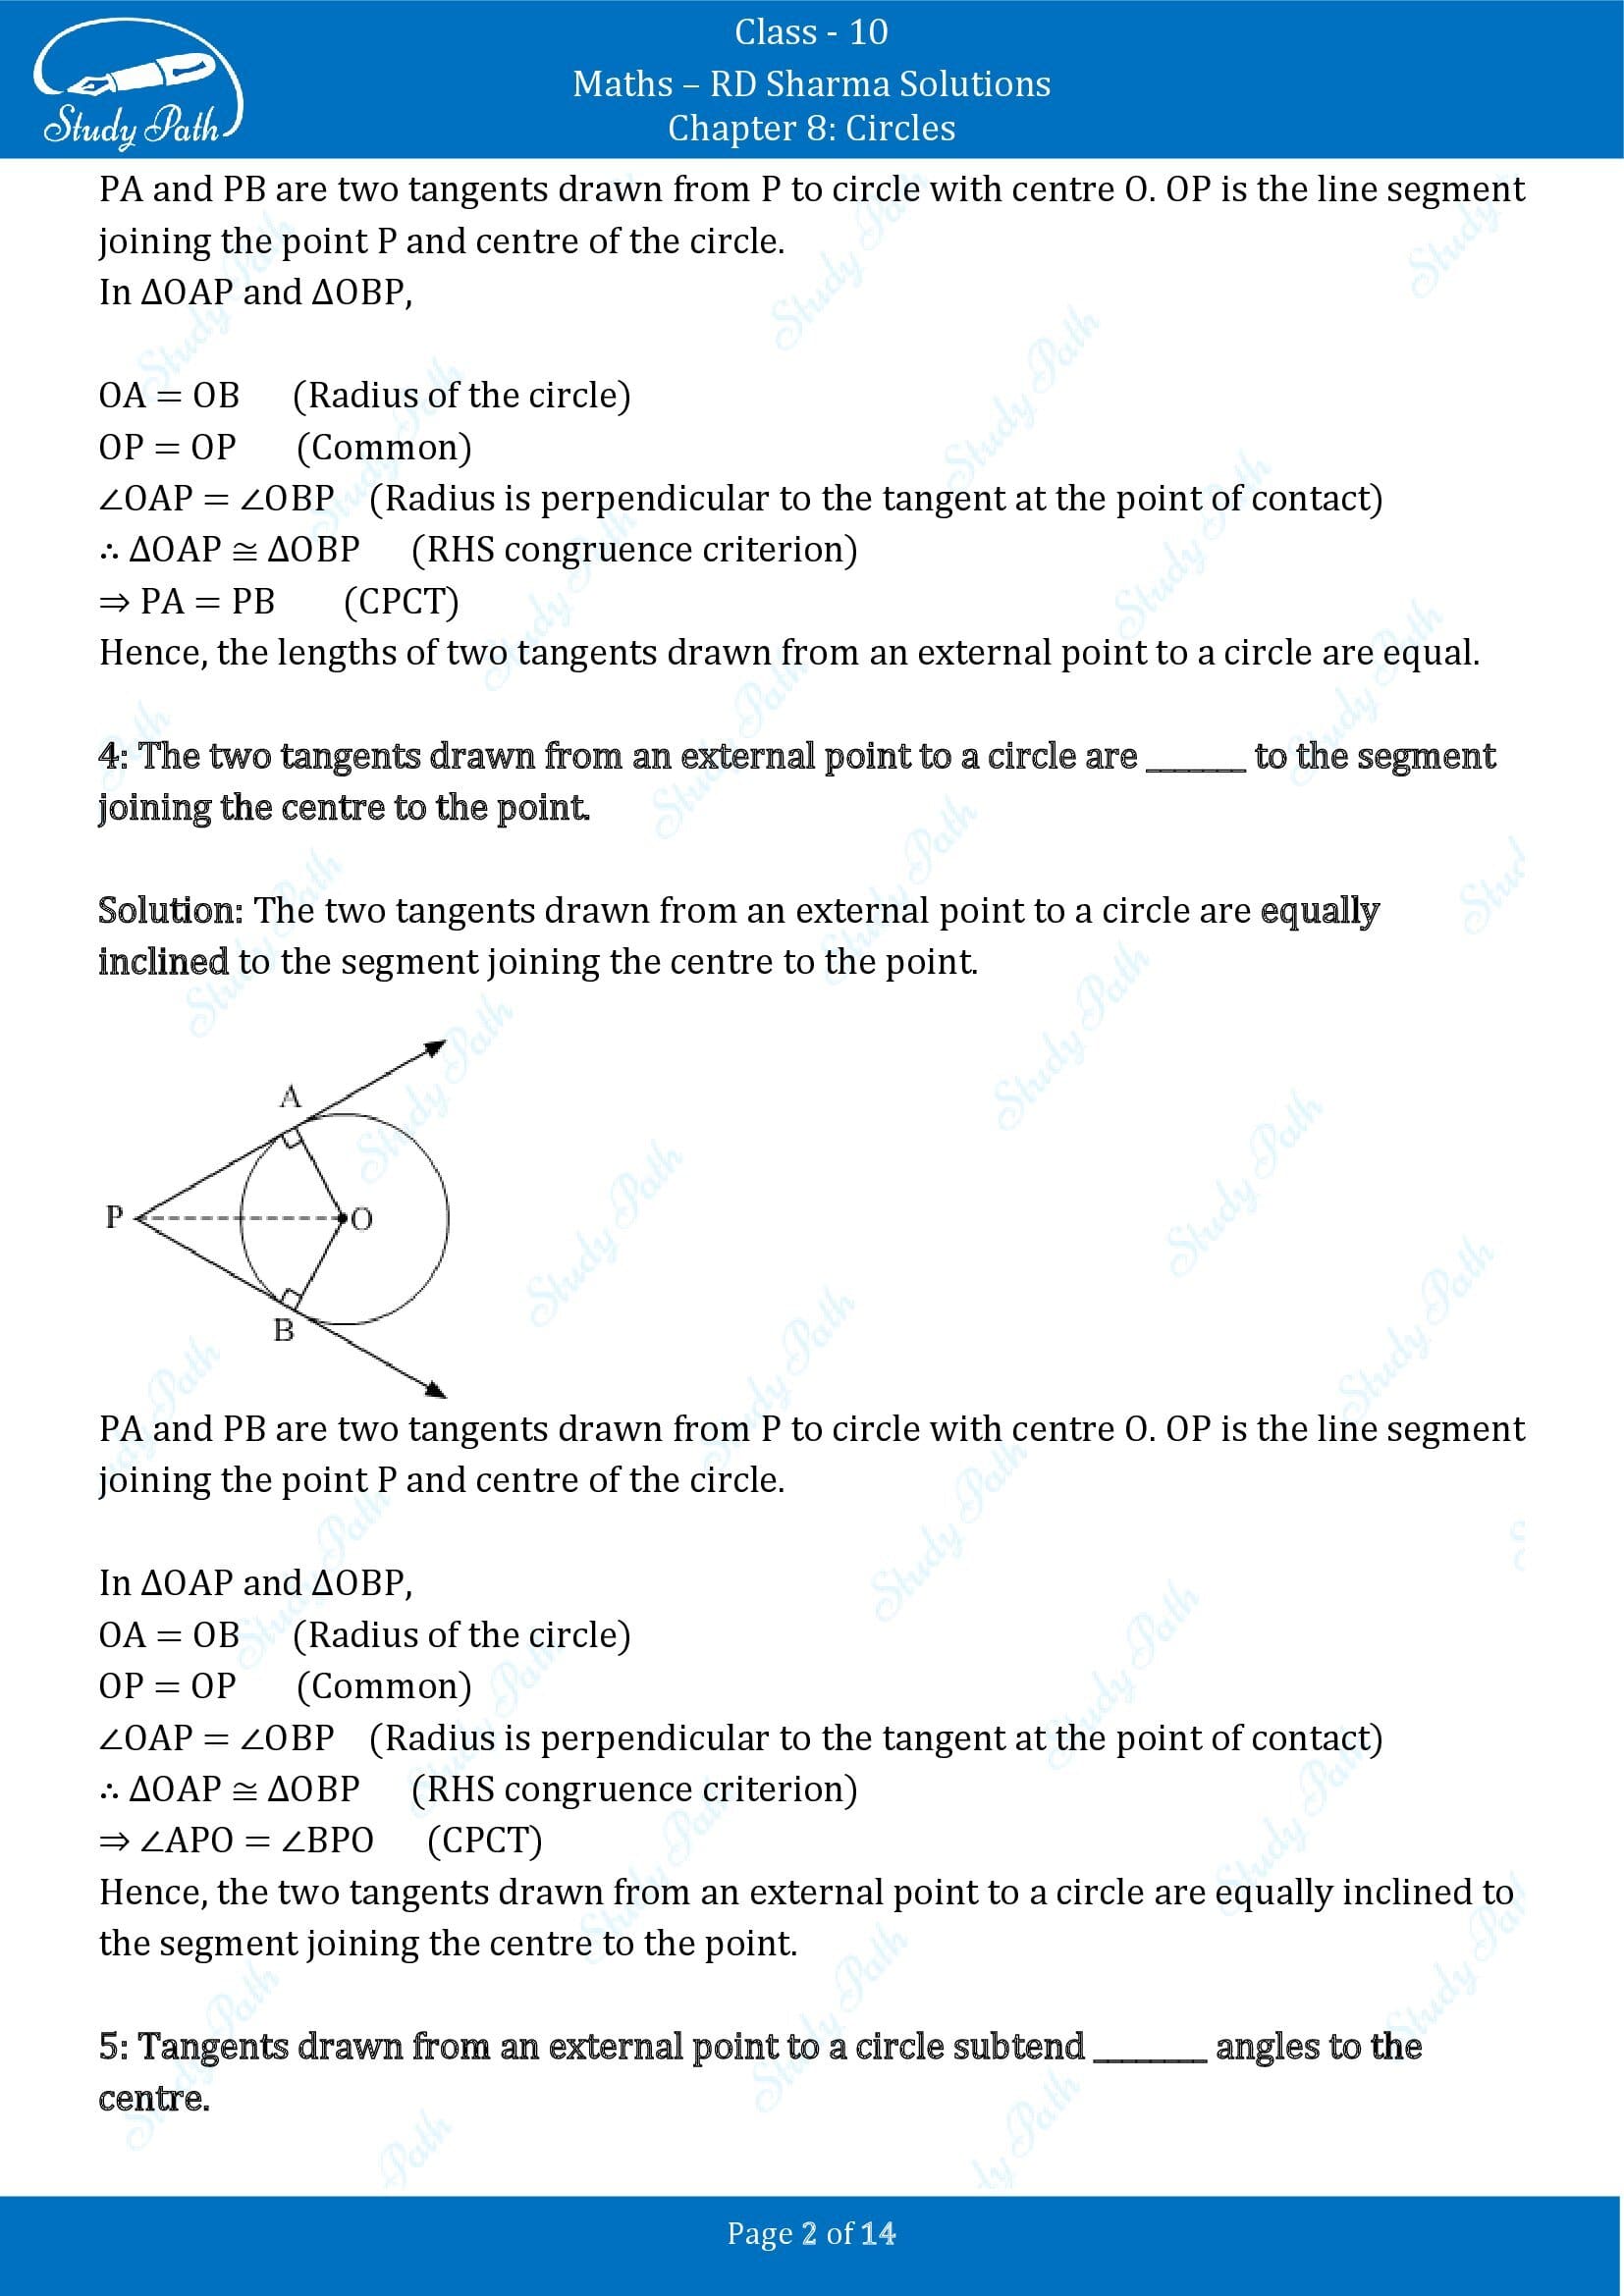 RD Sharma Solutions Class 10 Chapter 8 Circles Fill in the Blank Type Questions FBQs 00002